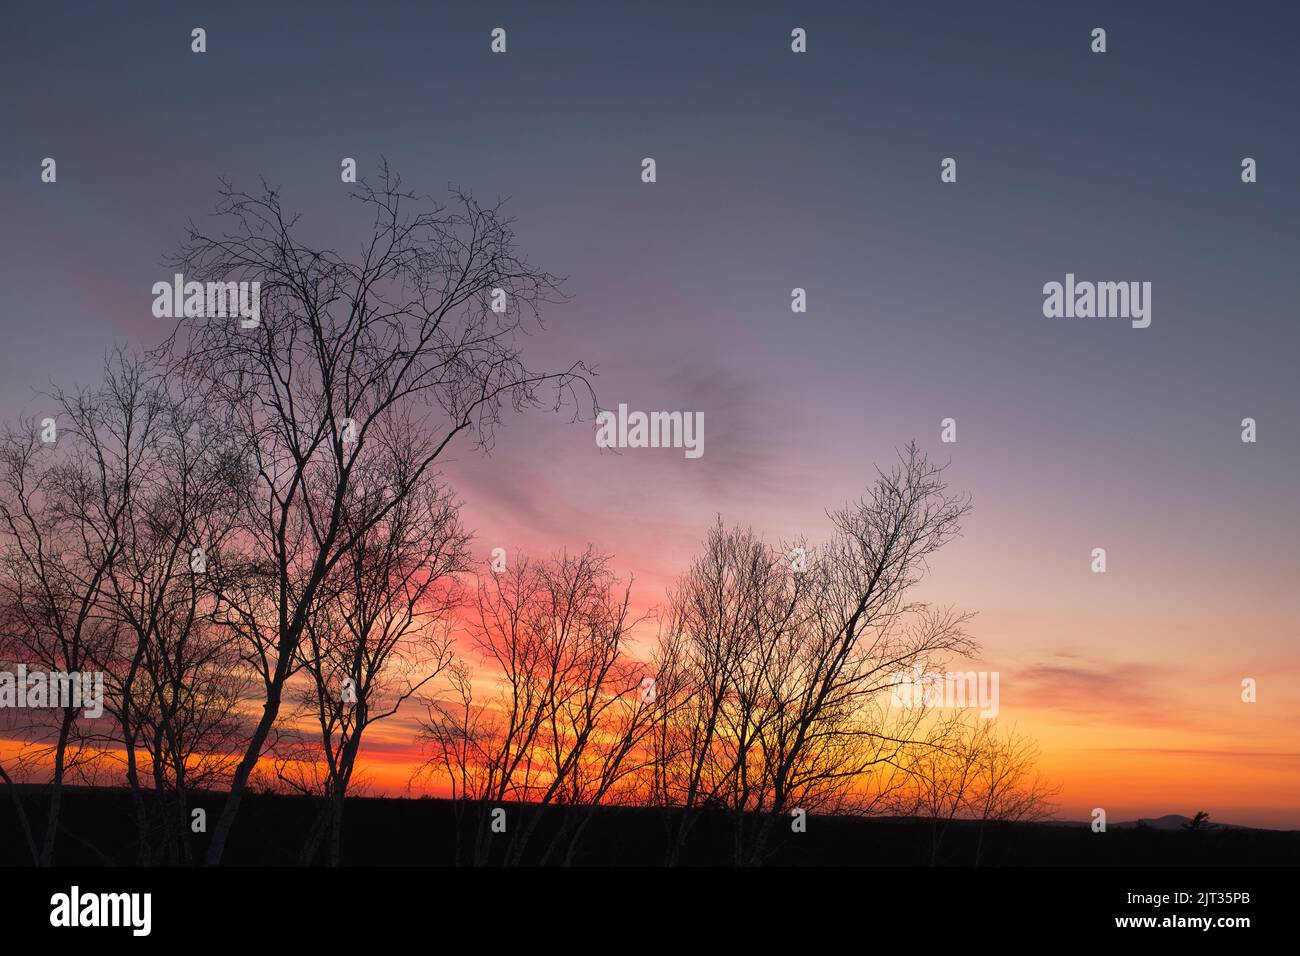 Silhouette of Bare Trees at Sunset Stock Photo